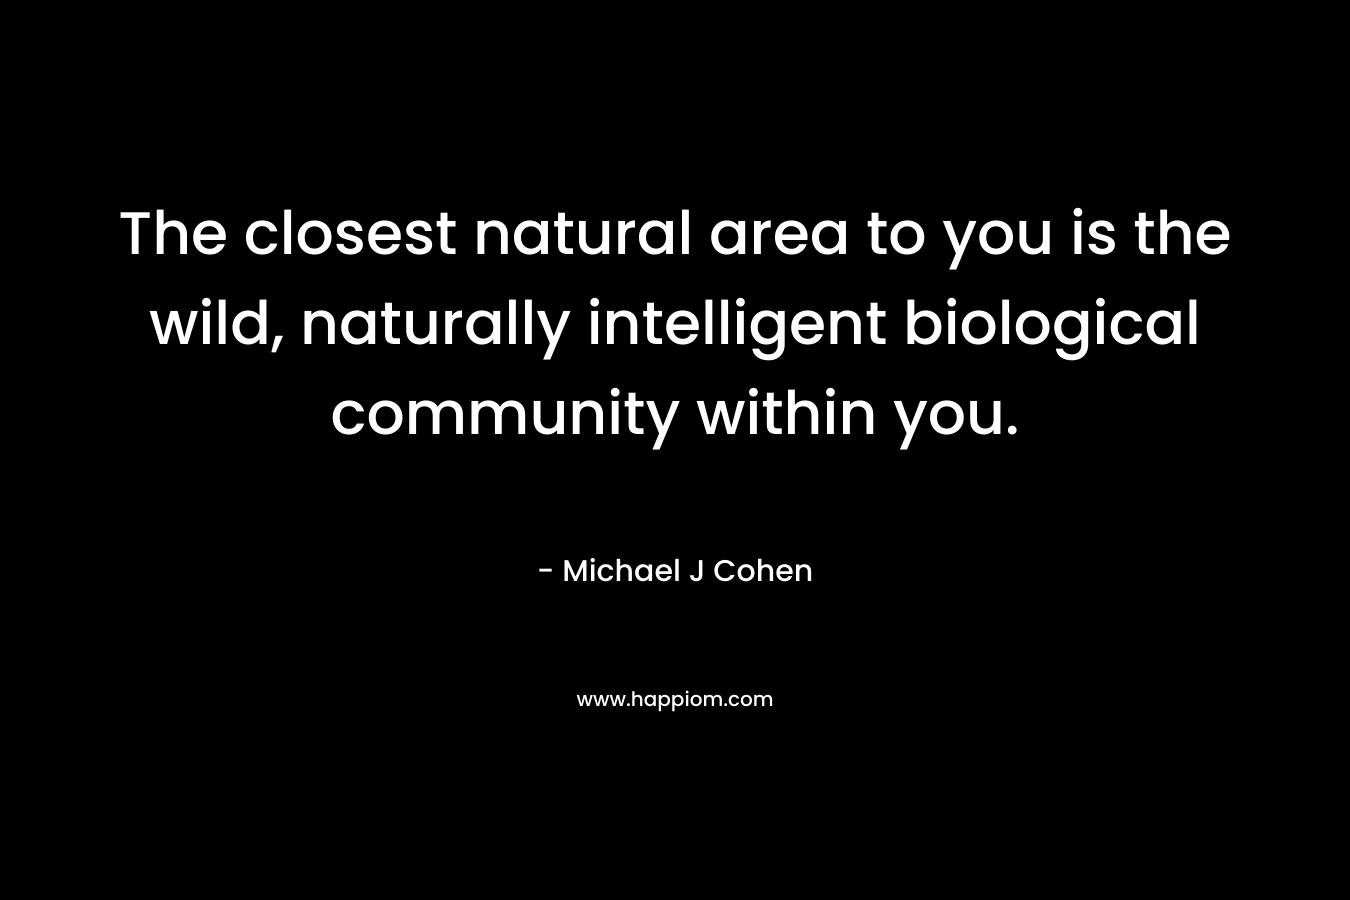 The closest natural area to you is the wild, naturally intelligent biological community within you. – Michael J Cohen